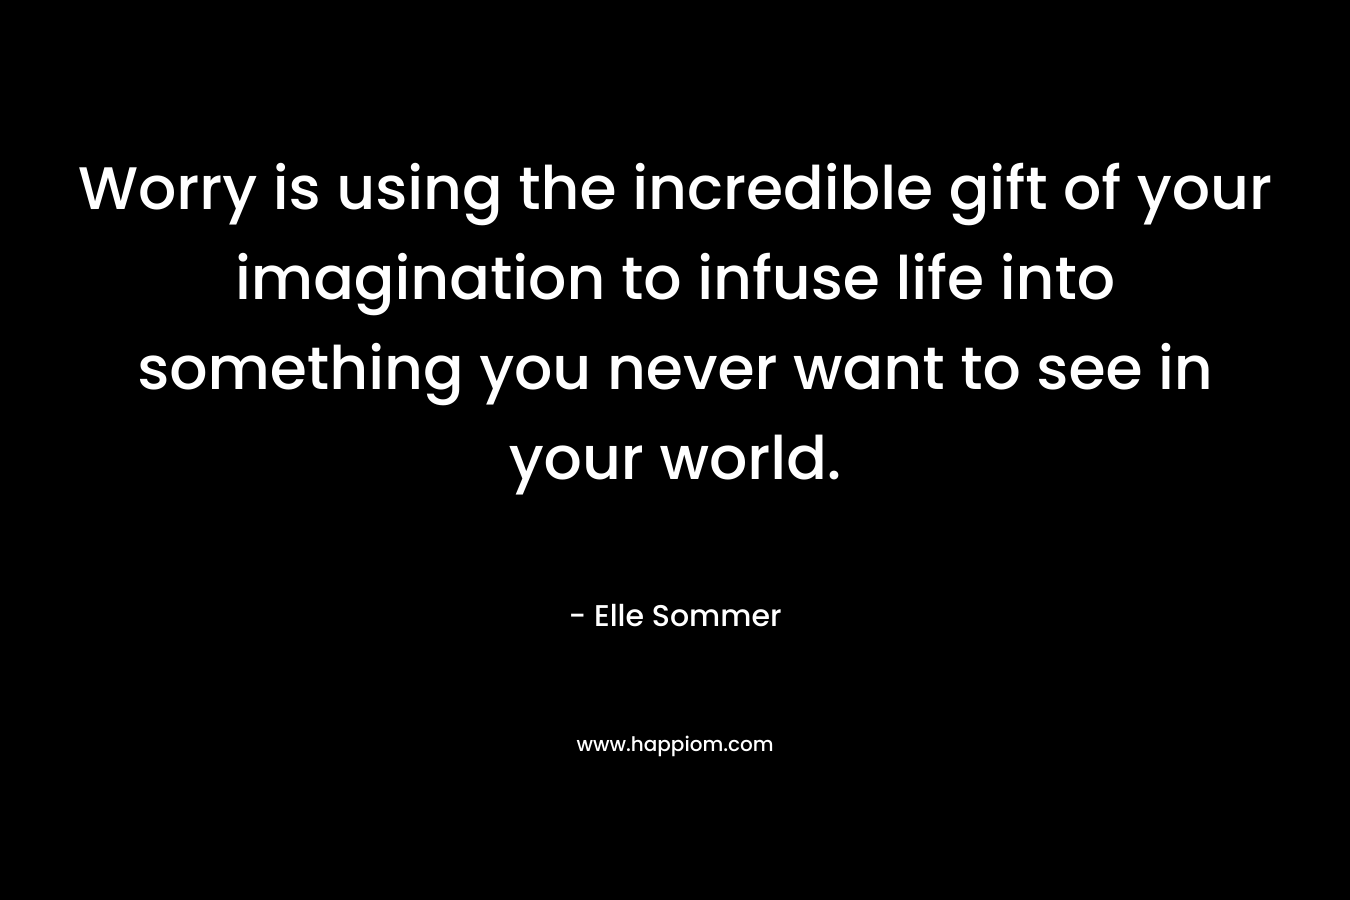 Worry is using the incredible gift of your imagination to infuse life into something you never want to see in your world.